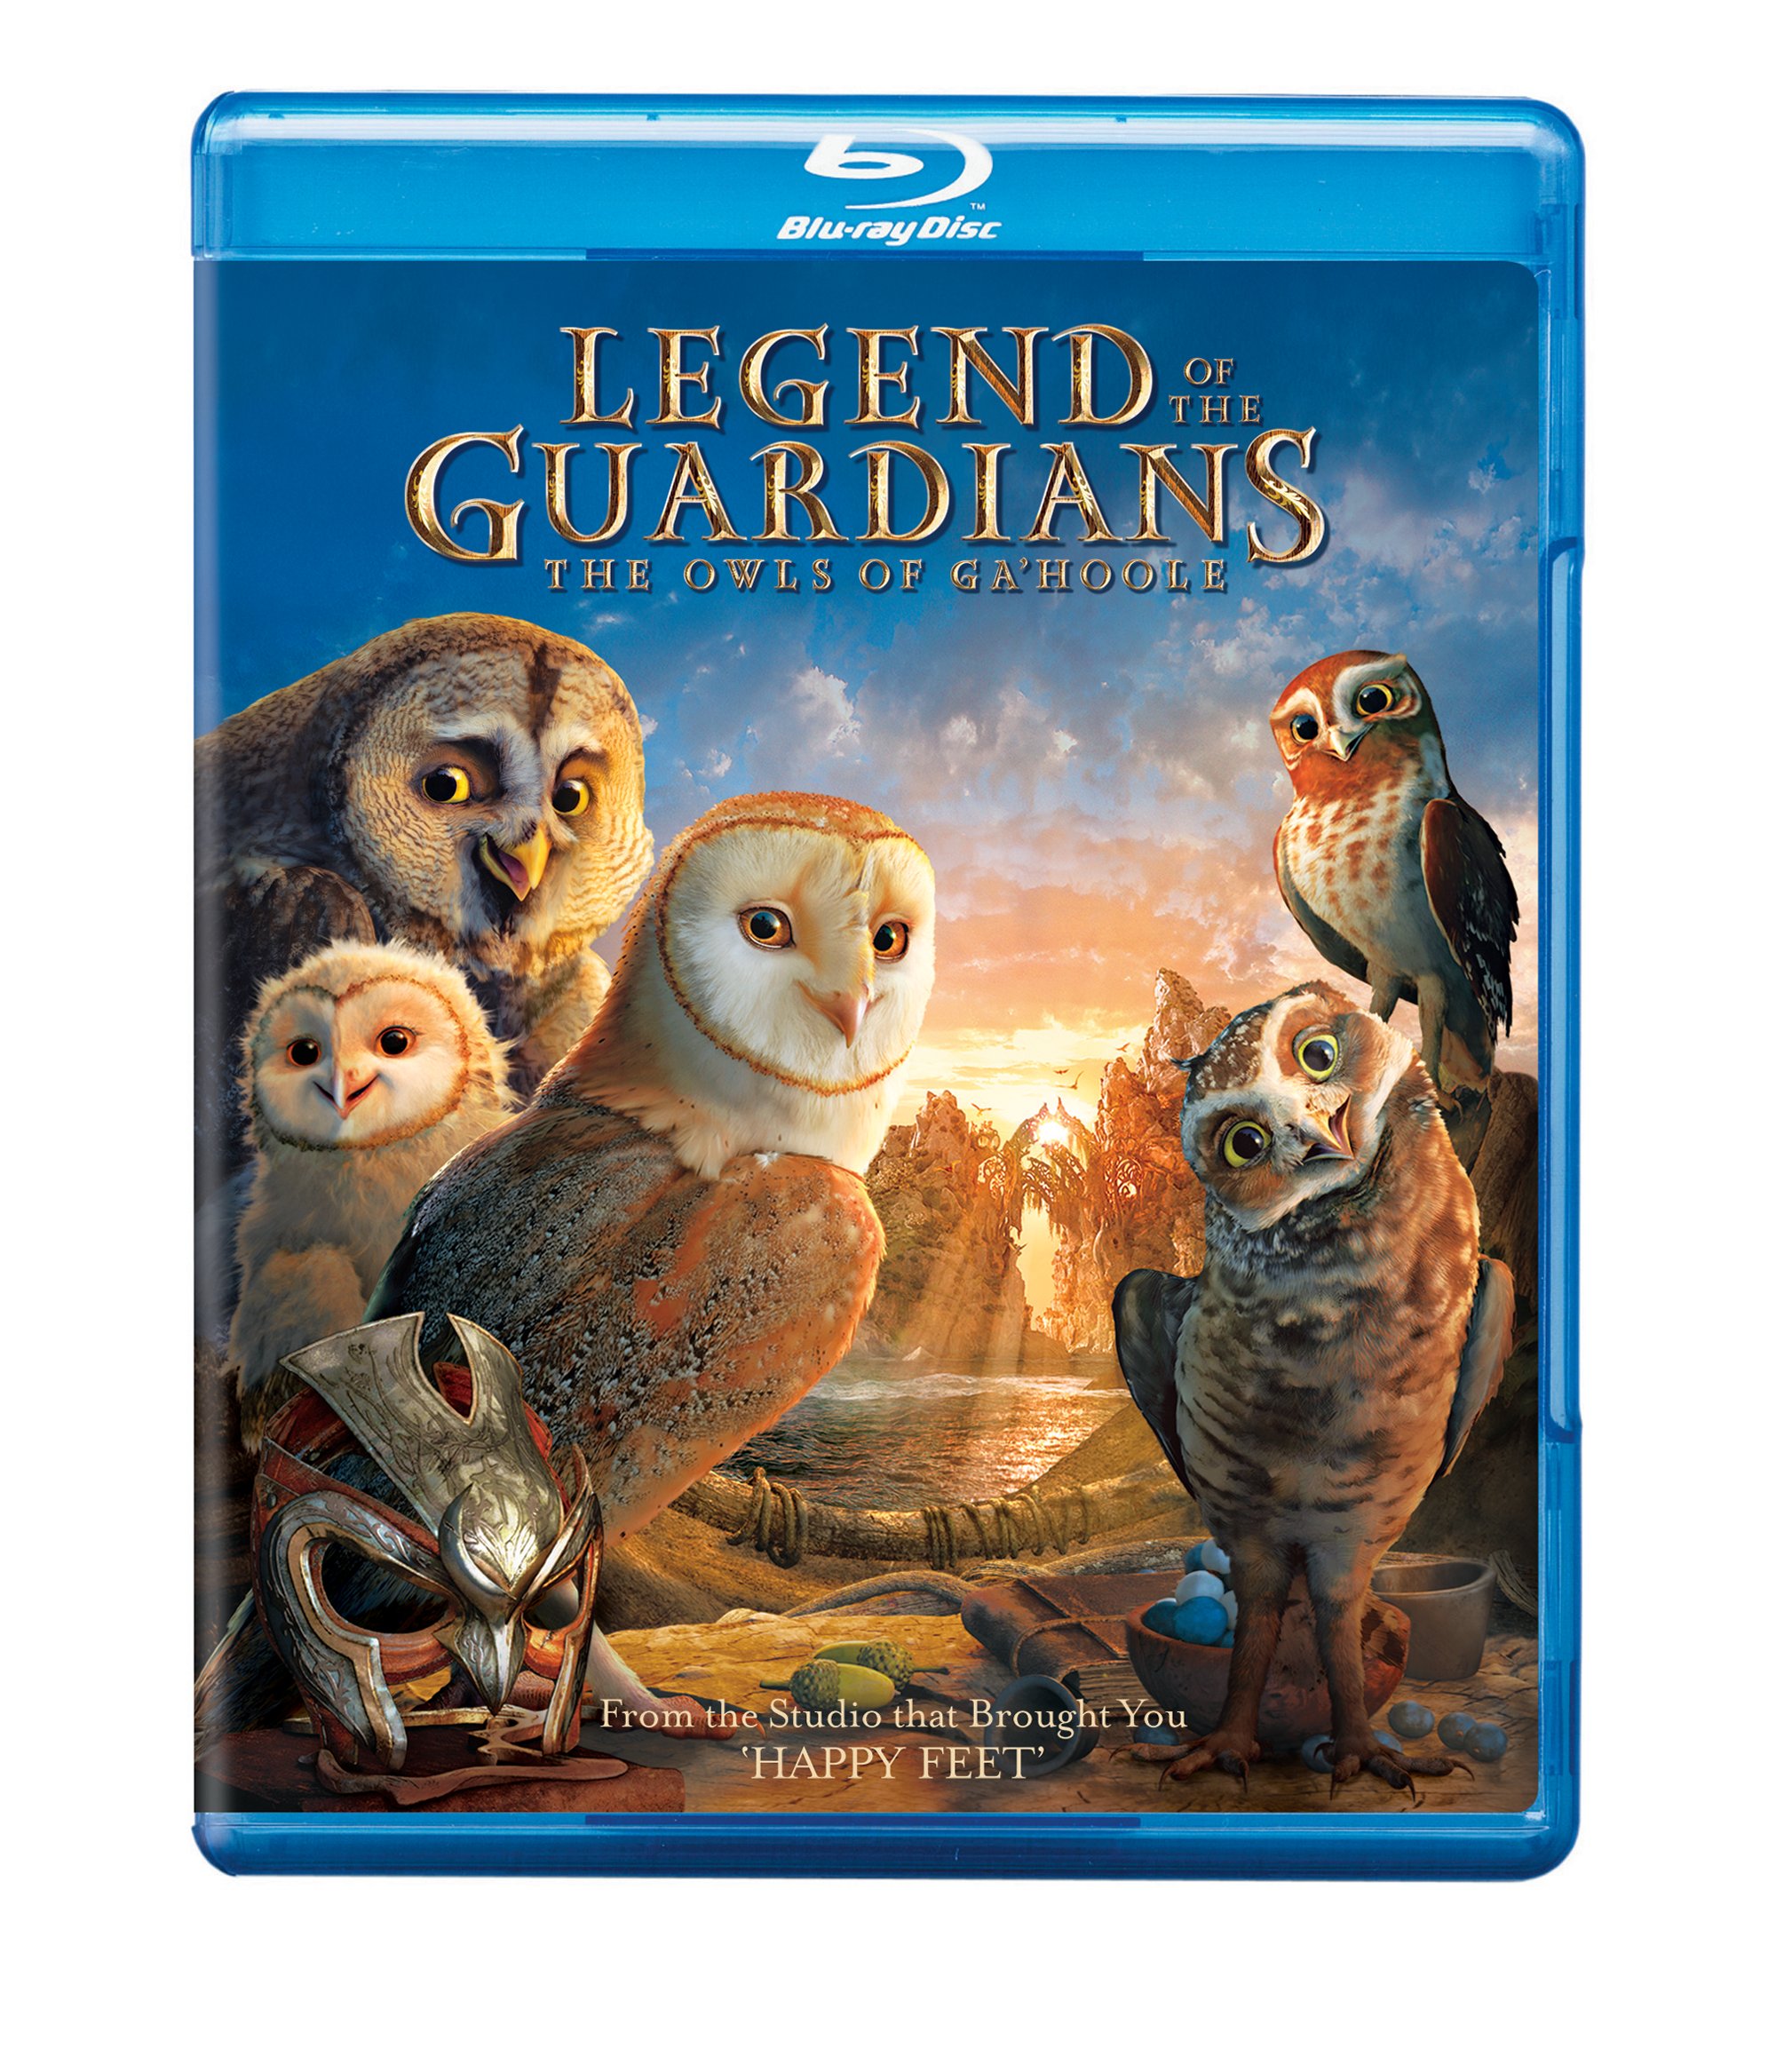 Legend Of The Guardians - The Owls Of Ga'Hoole - Blu-ray [ 2010 ]  - Children Movies On Blu-ray - Movies On GRUV